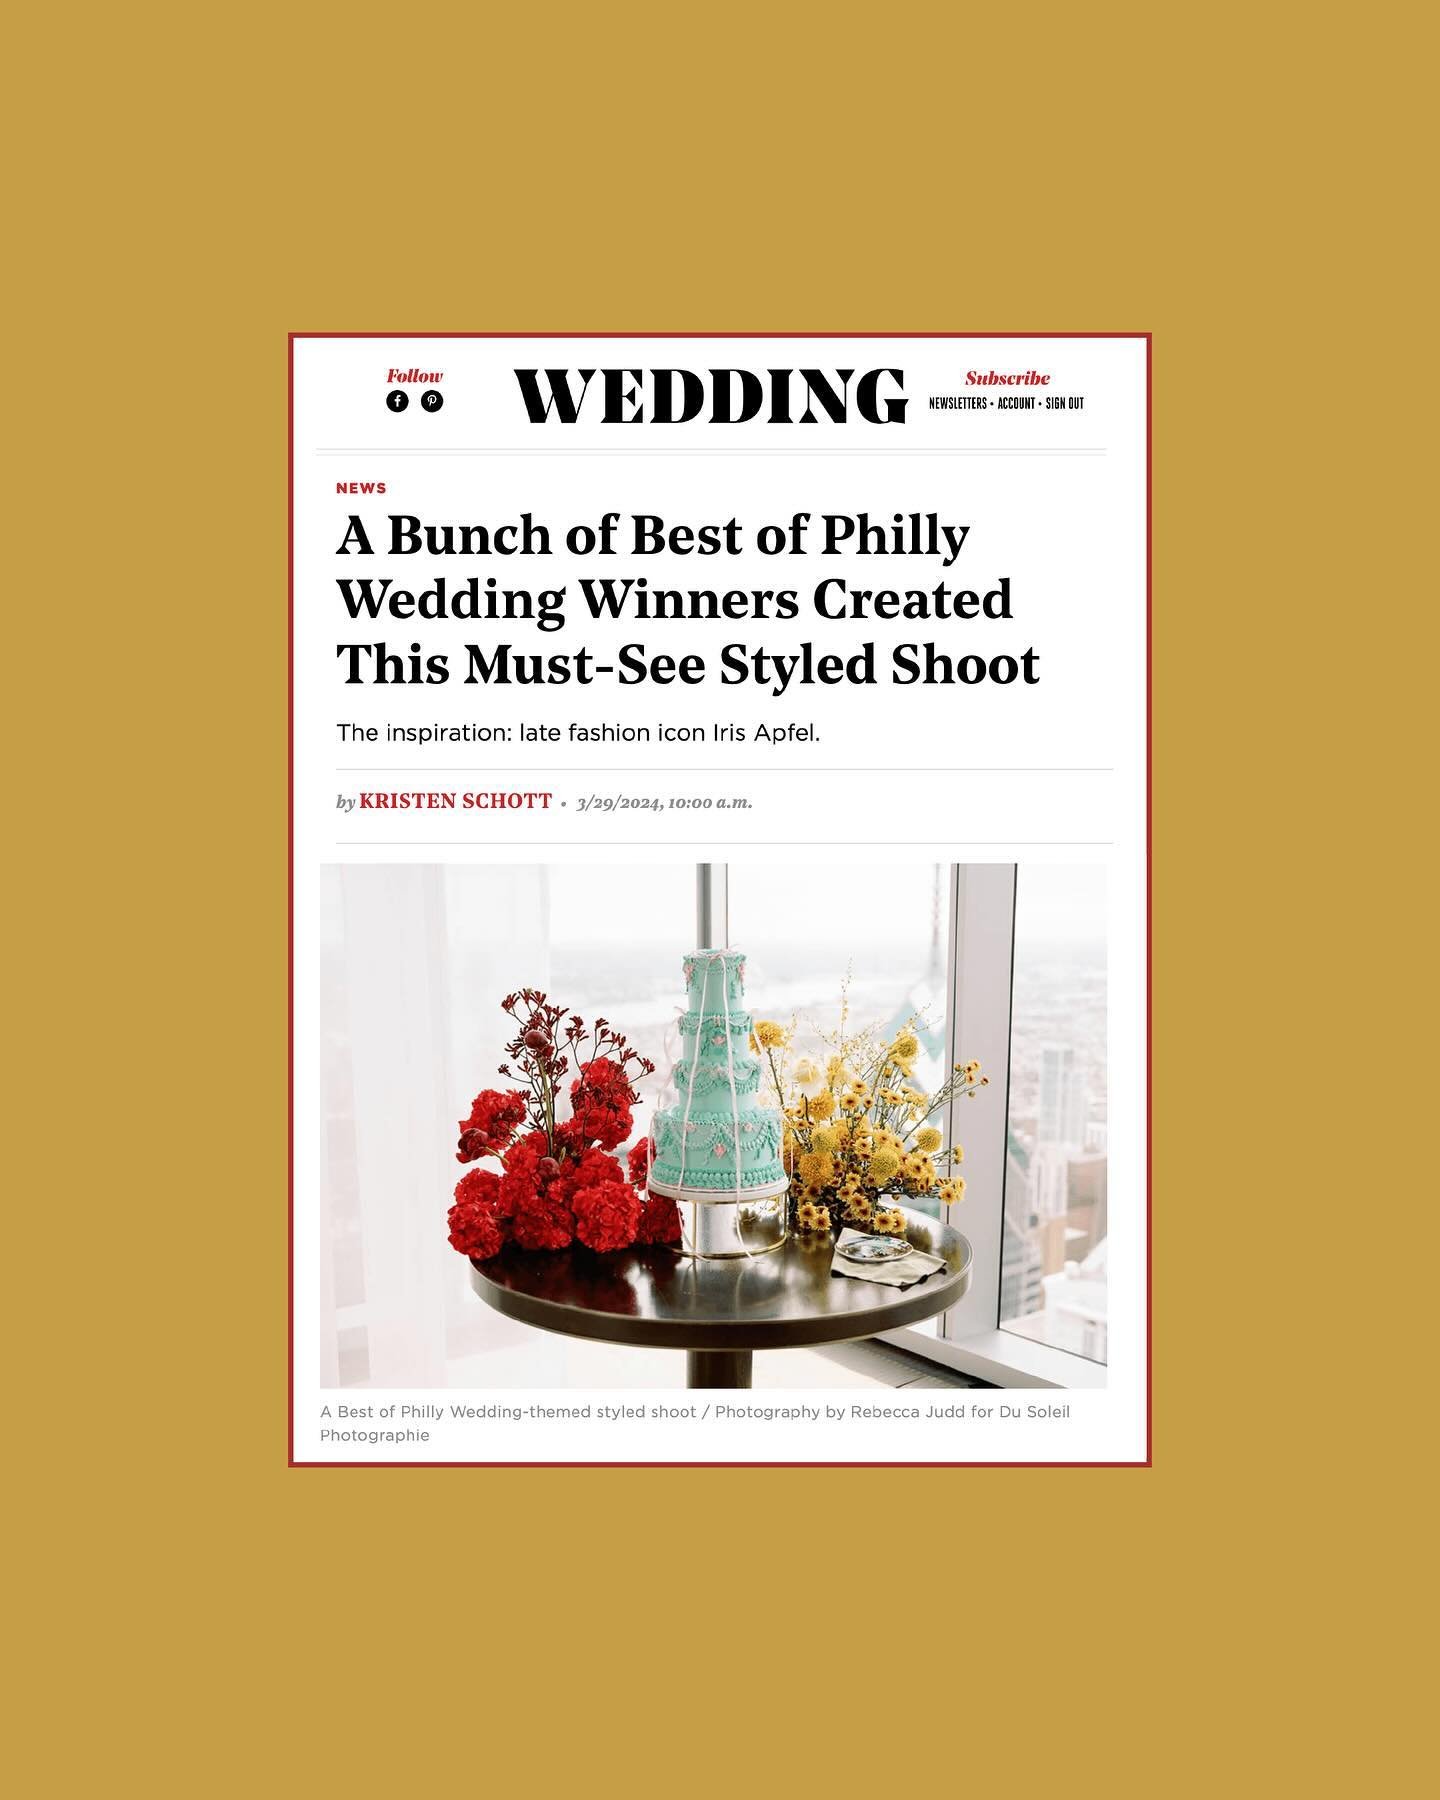 Gratitude overload! Huge thanks to @musaweddings for featuring Citrine pieces in this breathtaking shoot &ndash; what an honor! Sharing space with such esteemed vendors was a dream come true. And a special shoutout to @phillymag for the feature! Here